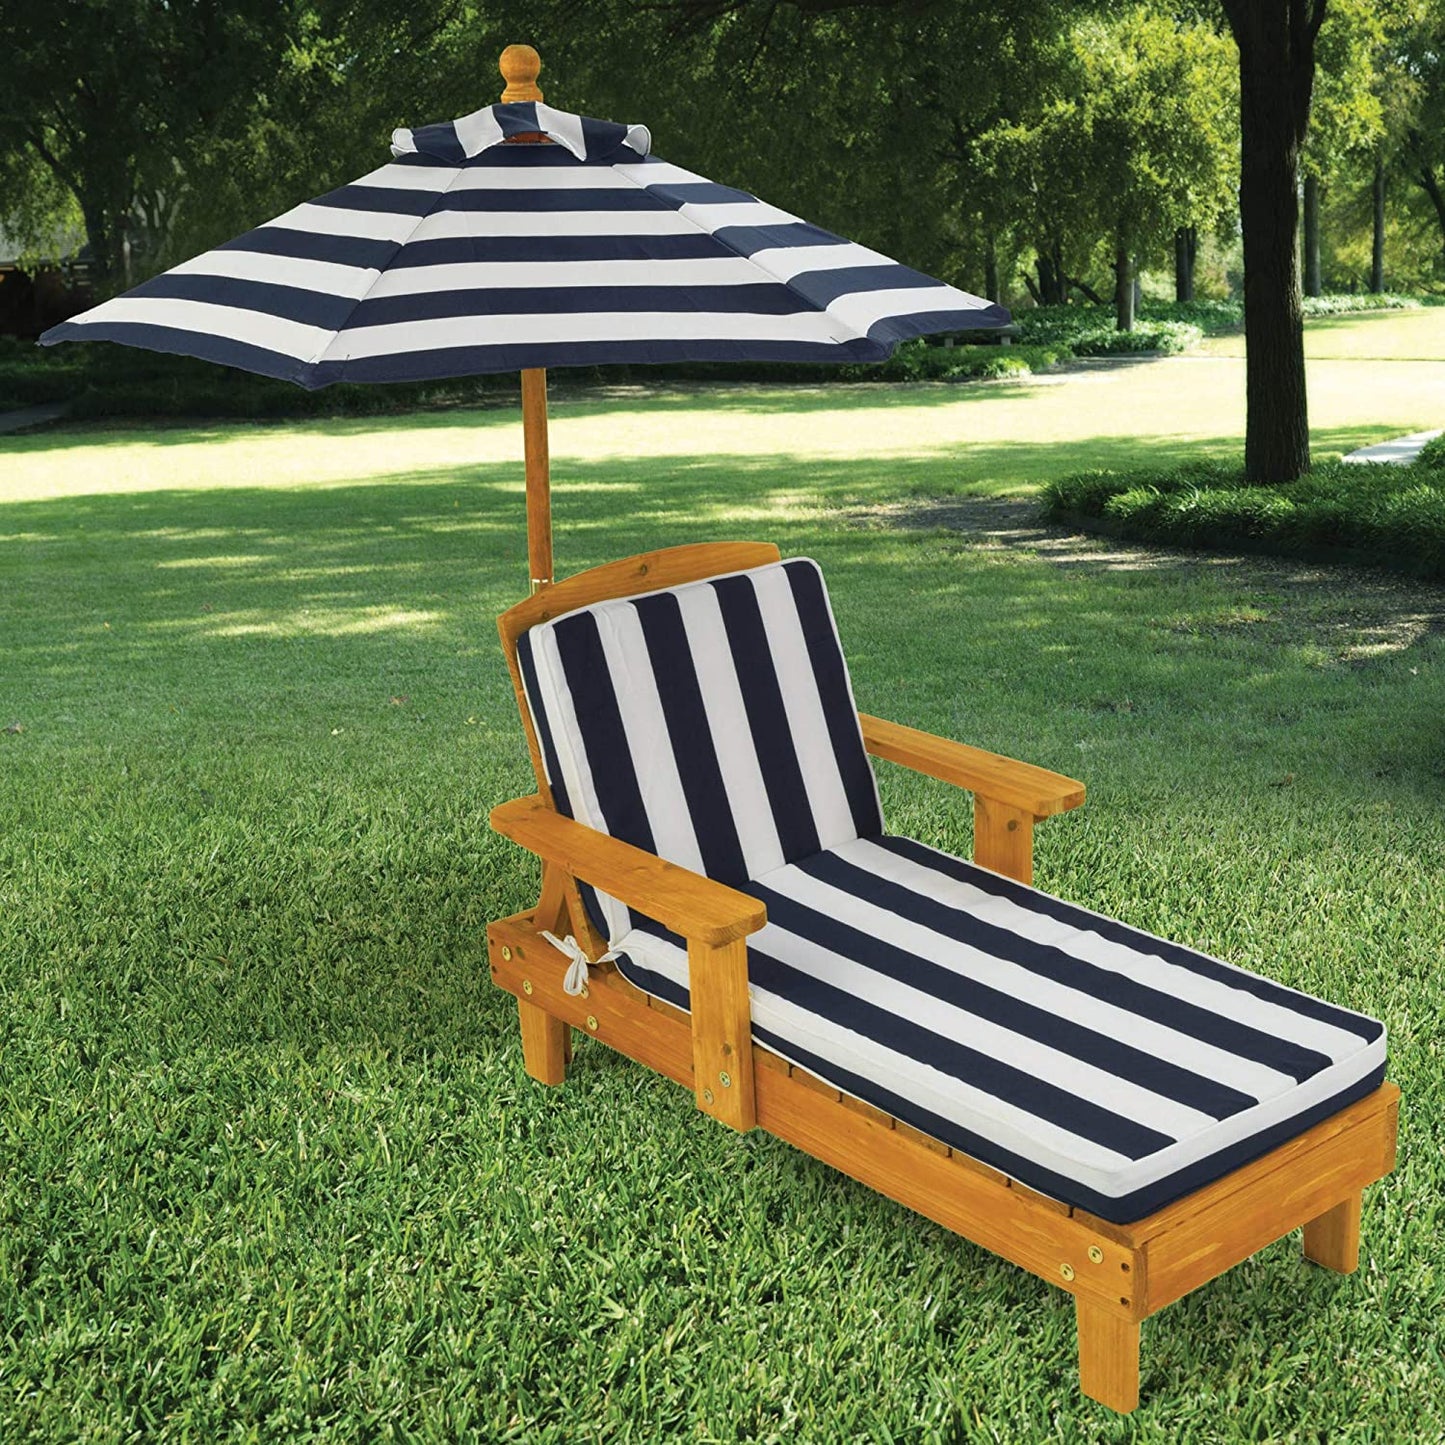 Outdoor Chaise Lounge Children's Backyard Furniture Chair with Umbrella and Cushion, Navy and White